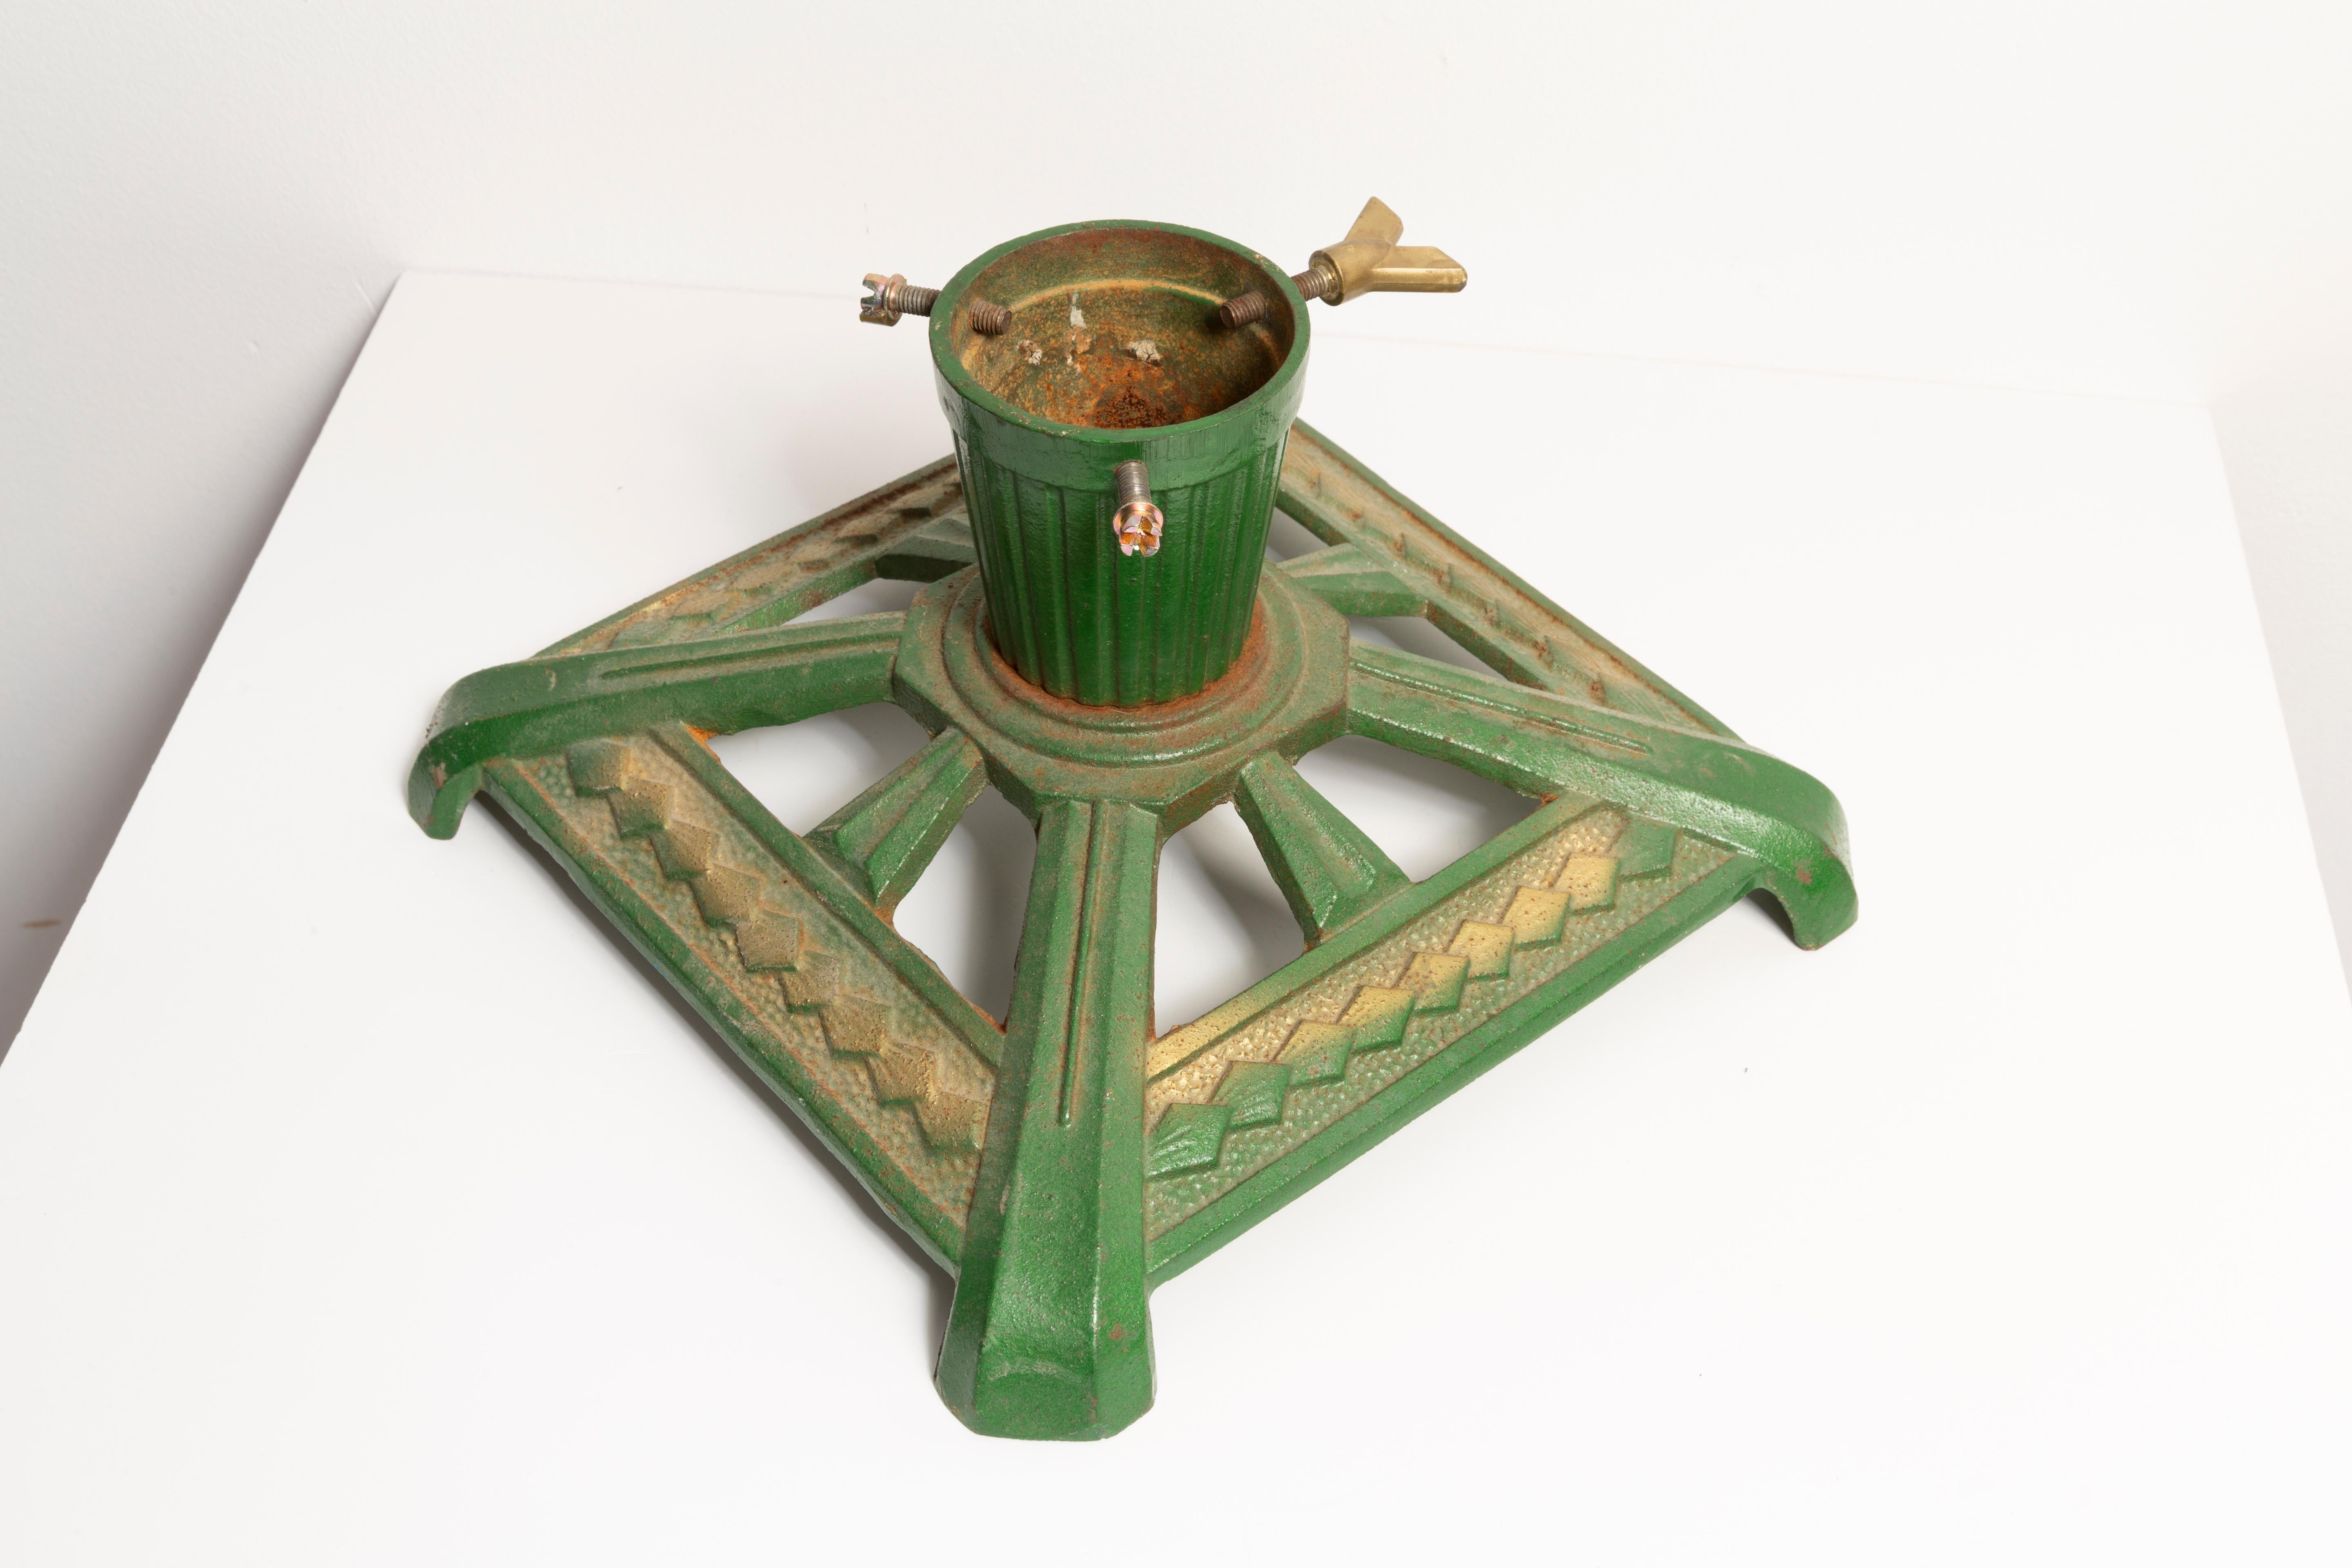 This early 20th century, cast iron Christmas tree stand is especially crafted for small Christmas trees. It is perfectly Art Deco in shape and it is ideal for displaying a Christmas tree in a shop window, on a table or on the floor, but made for